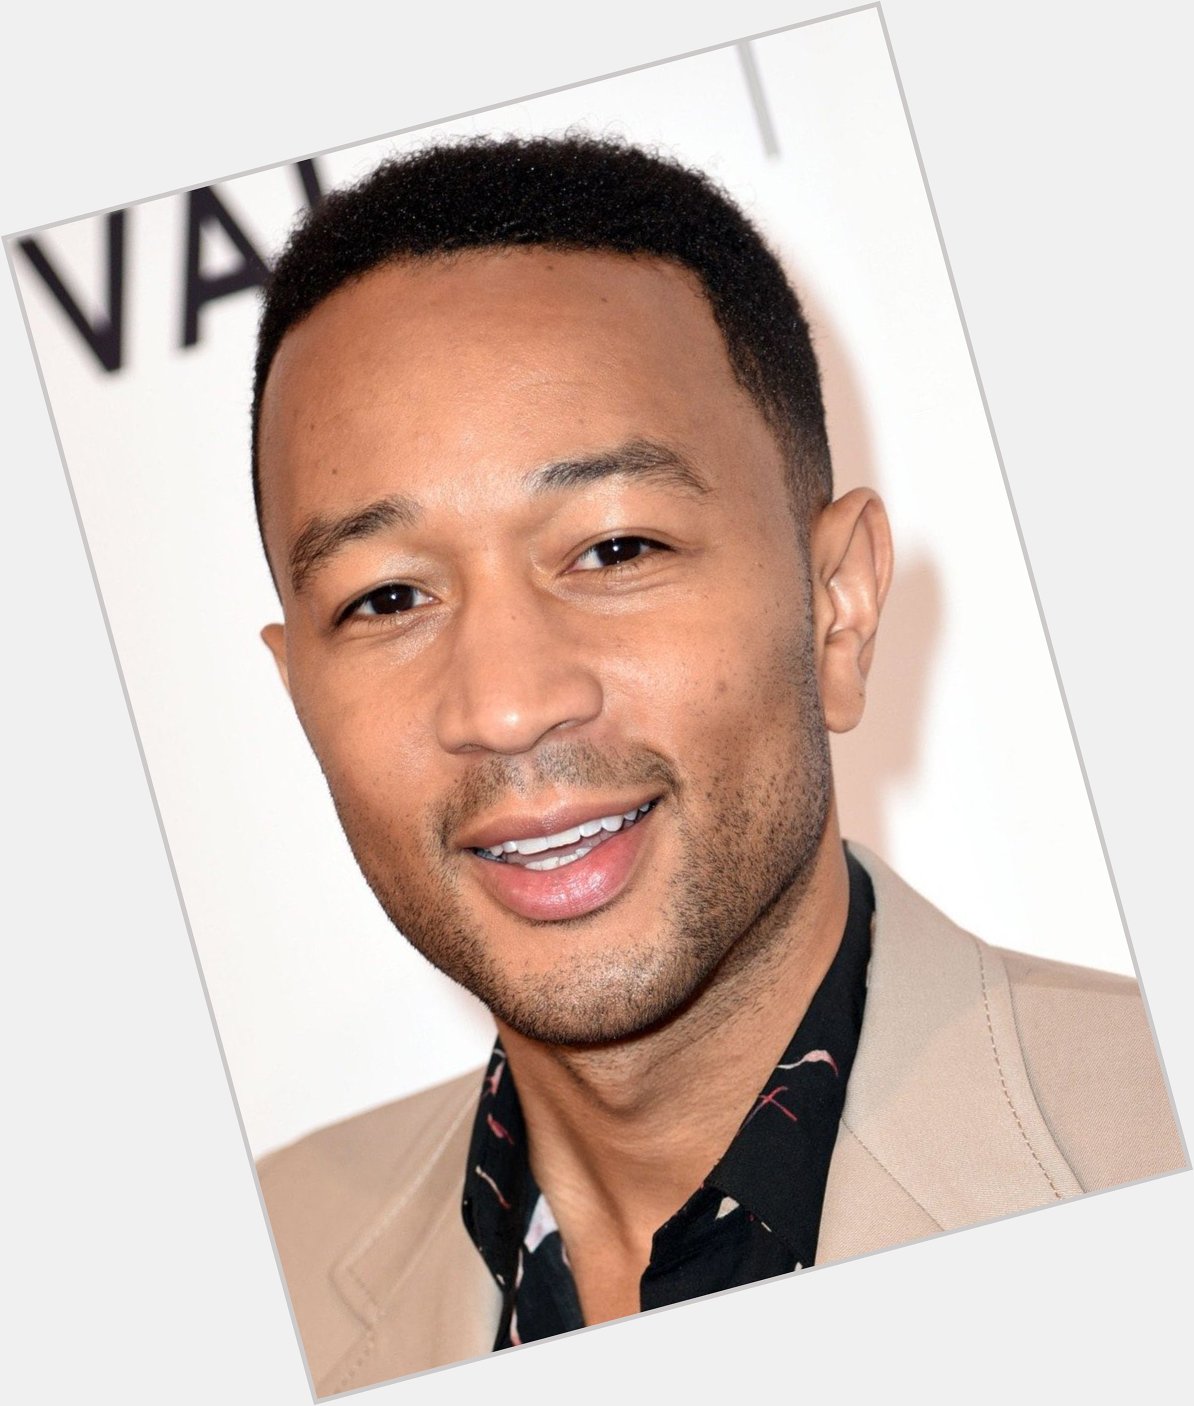 Wishing a Happy 42nd Birthday to singer-songwriter John Legend  . What s your favorite John Legend song? 